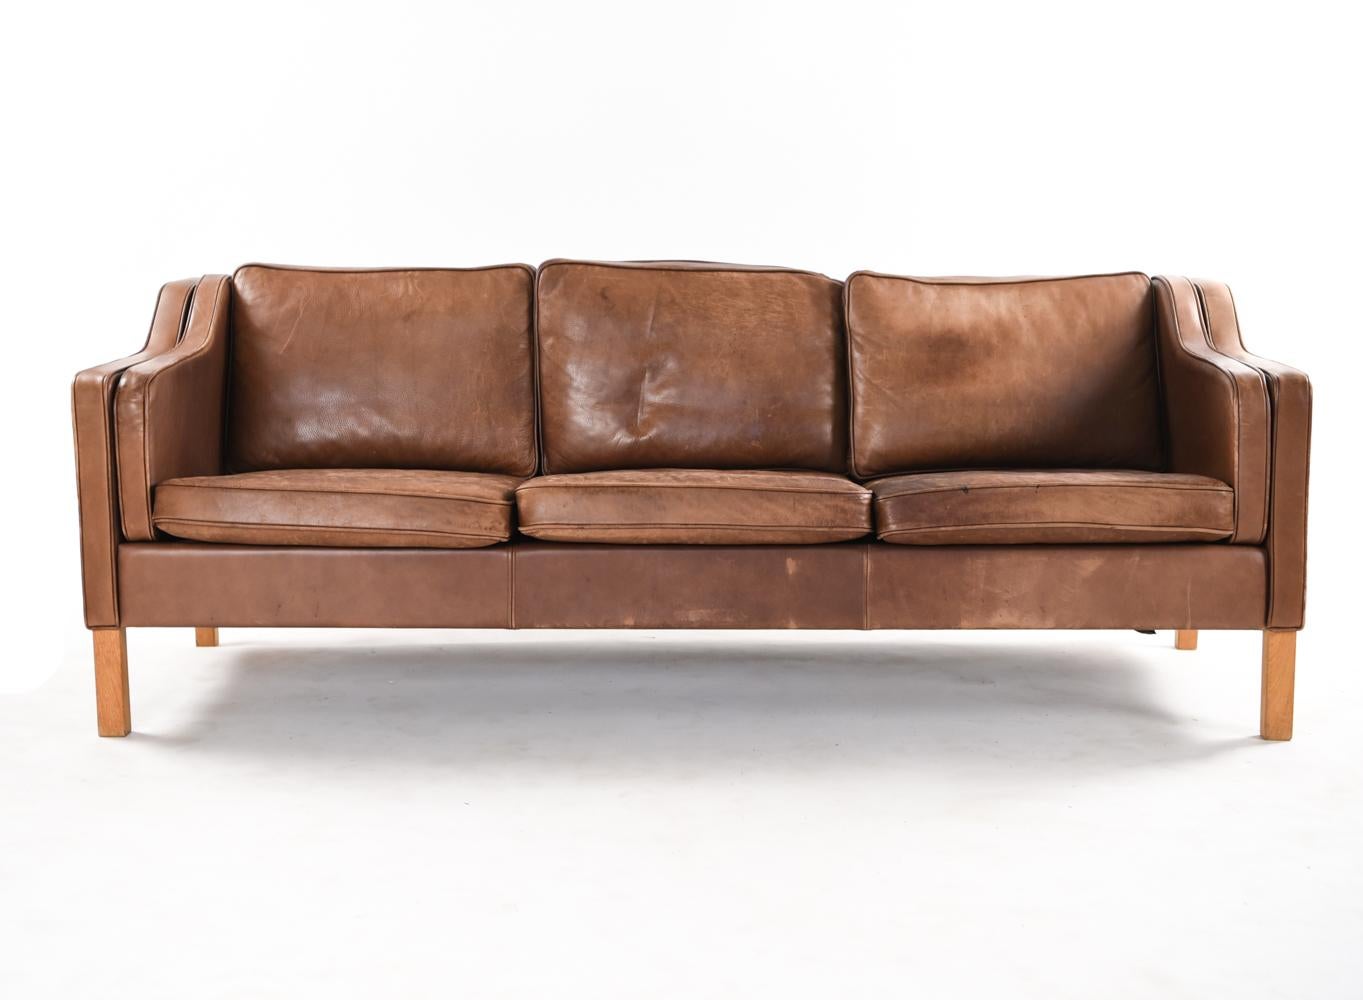 This attractive Danish midcentury three-seat sofa is in the manner of Borge Mogensen's timeless design. The brown leather displays a lovely patination from age.